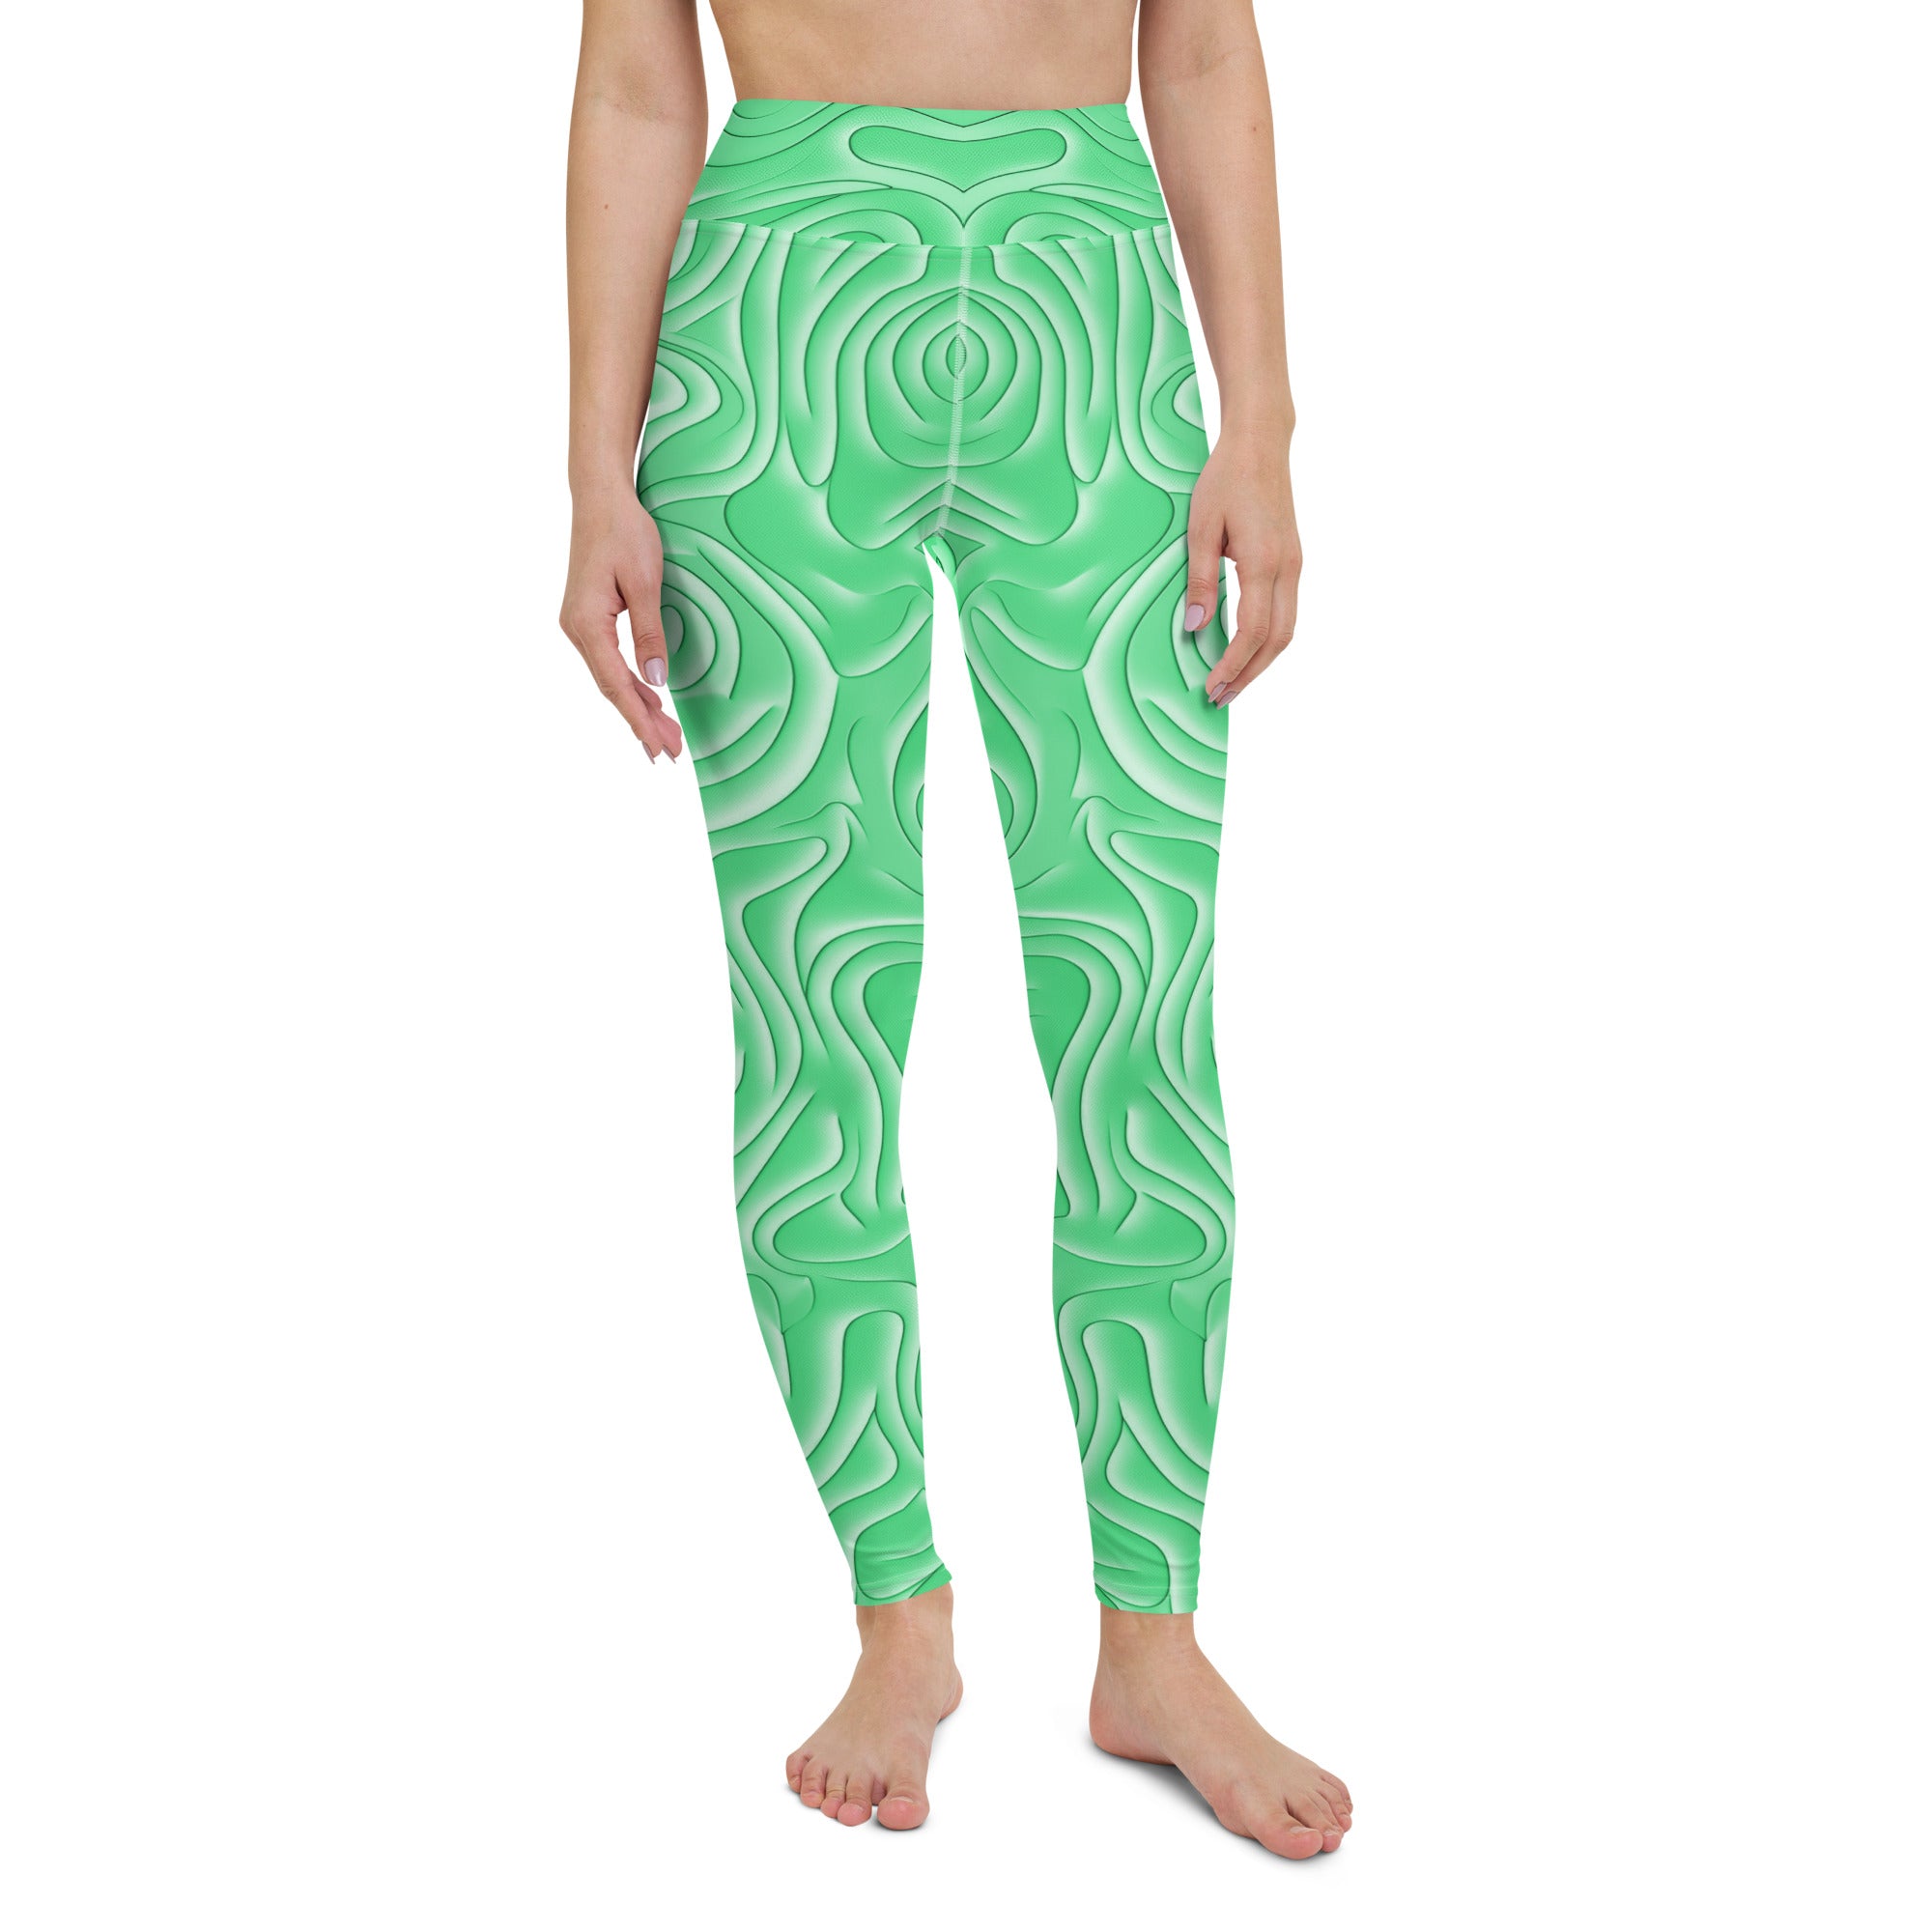 Model wearing Vibrant Vibes All-Over Print Yoga Leggings while stretching